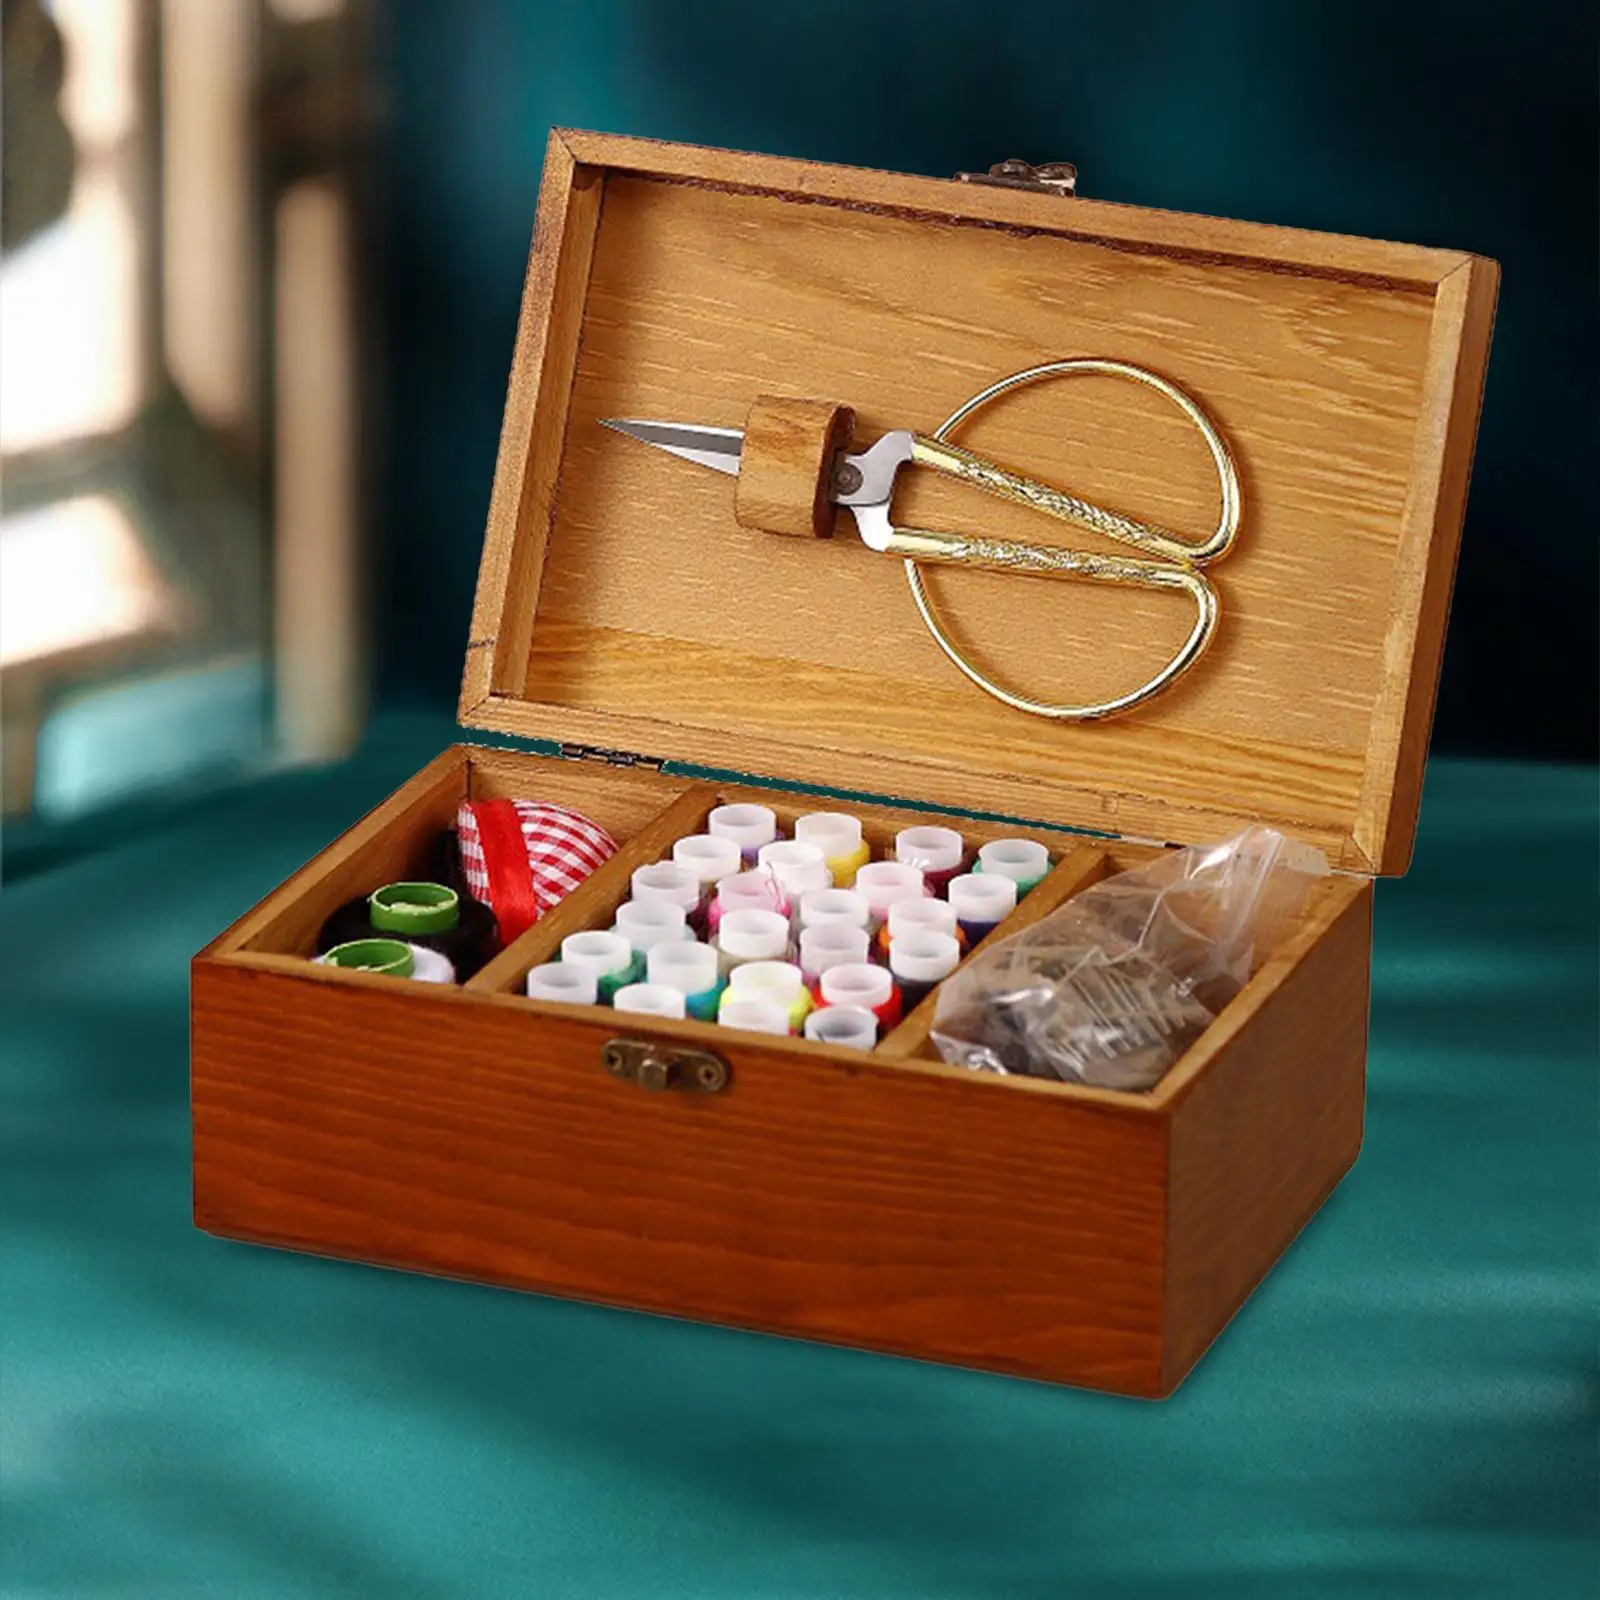 Wooden Sewing Box Empty Box Organizer for Jewelry Cosmetic Travel Pattern Accessories Compact DIY Sewing Box Basket